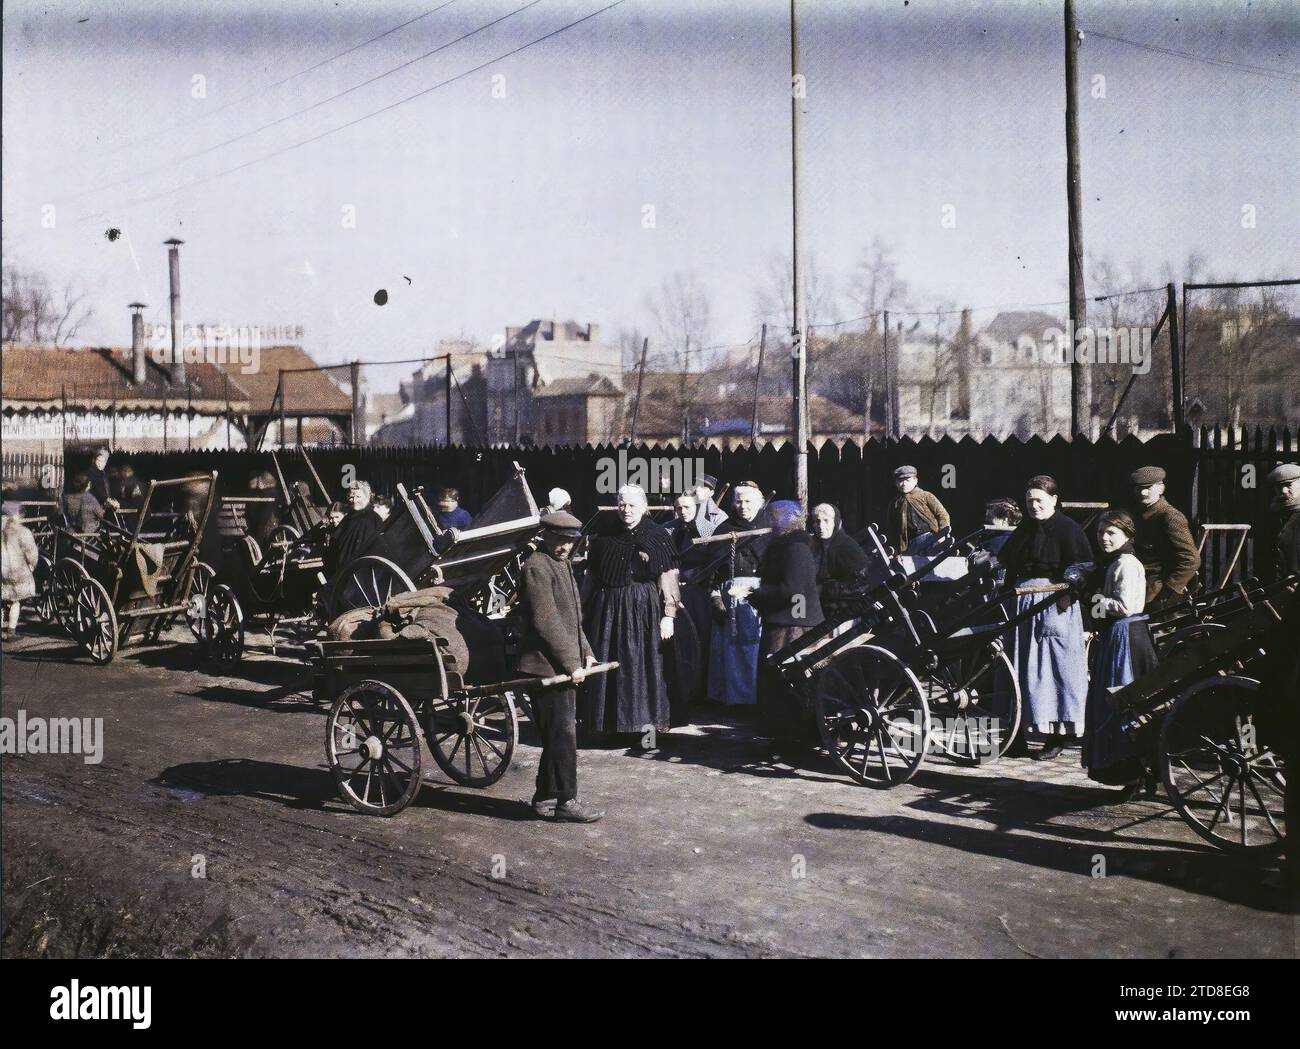 Reims, Marne, Champagne, France Coal distribution, Transport, First World War, Hand transport, Cart, Rear, Shortages, rationing, France, Reims, Coal distribution, Reims, 28/03/1917 - 28/03/1917, Castelnau, Paul, 1917 - Marne - Fernand Cuville (Photographic section of the army), Autochrome, photo, Glass, Autochrome, photo, Positive, Horizontal, Size 9 x 12 cm Stock Photo